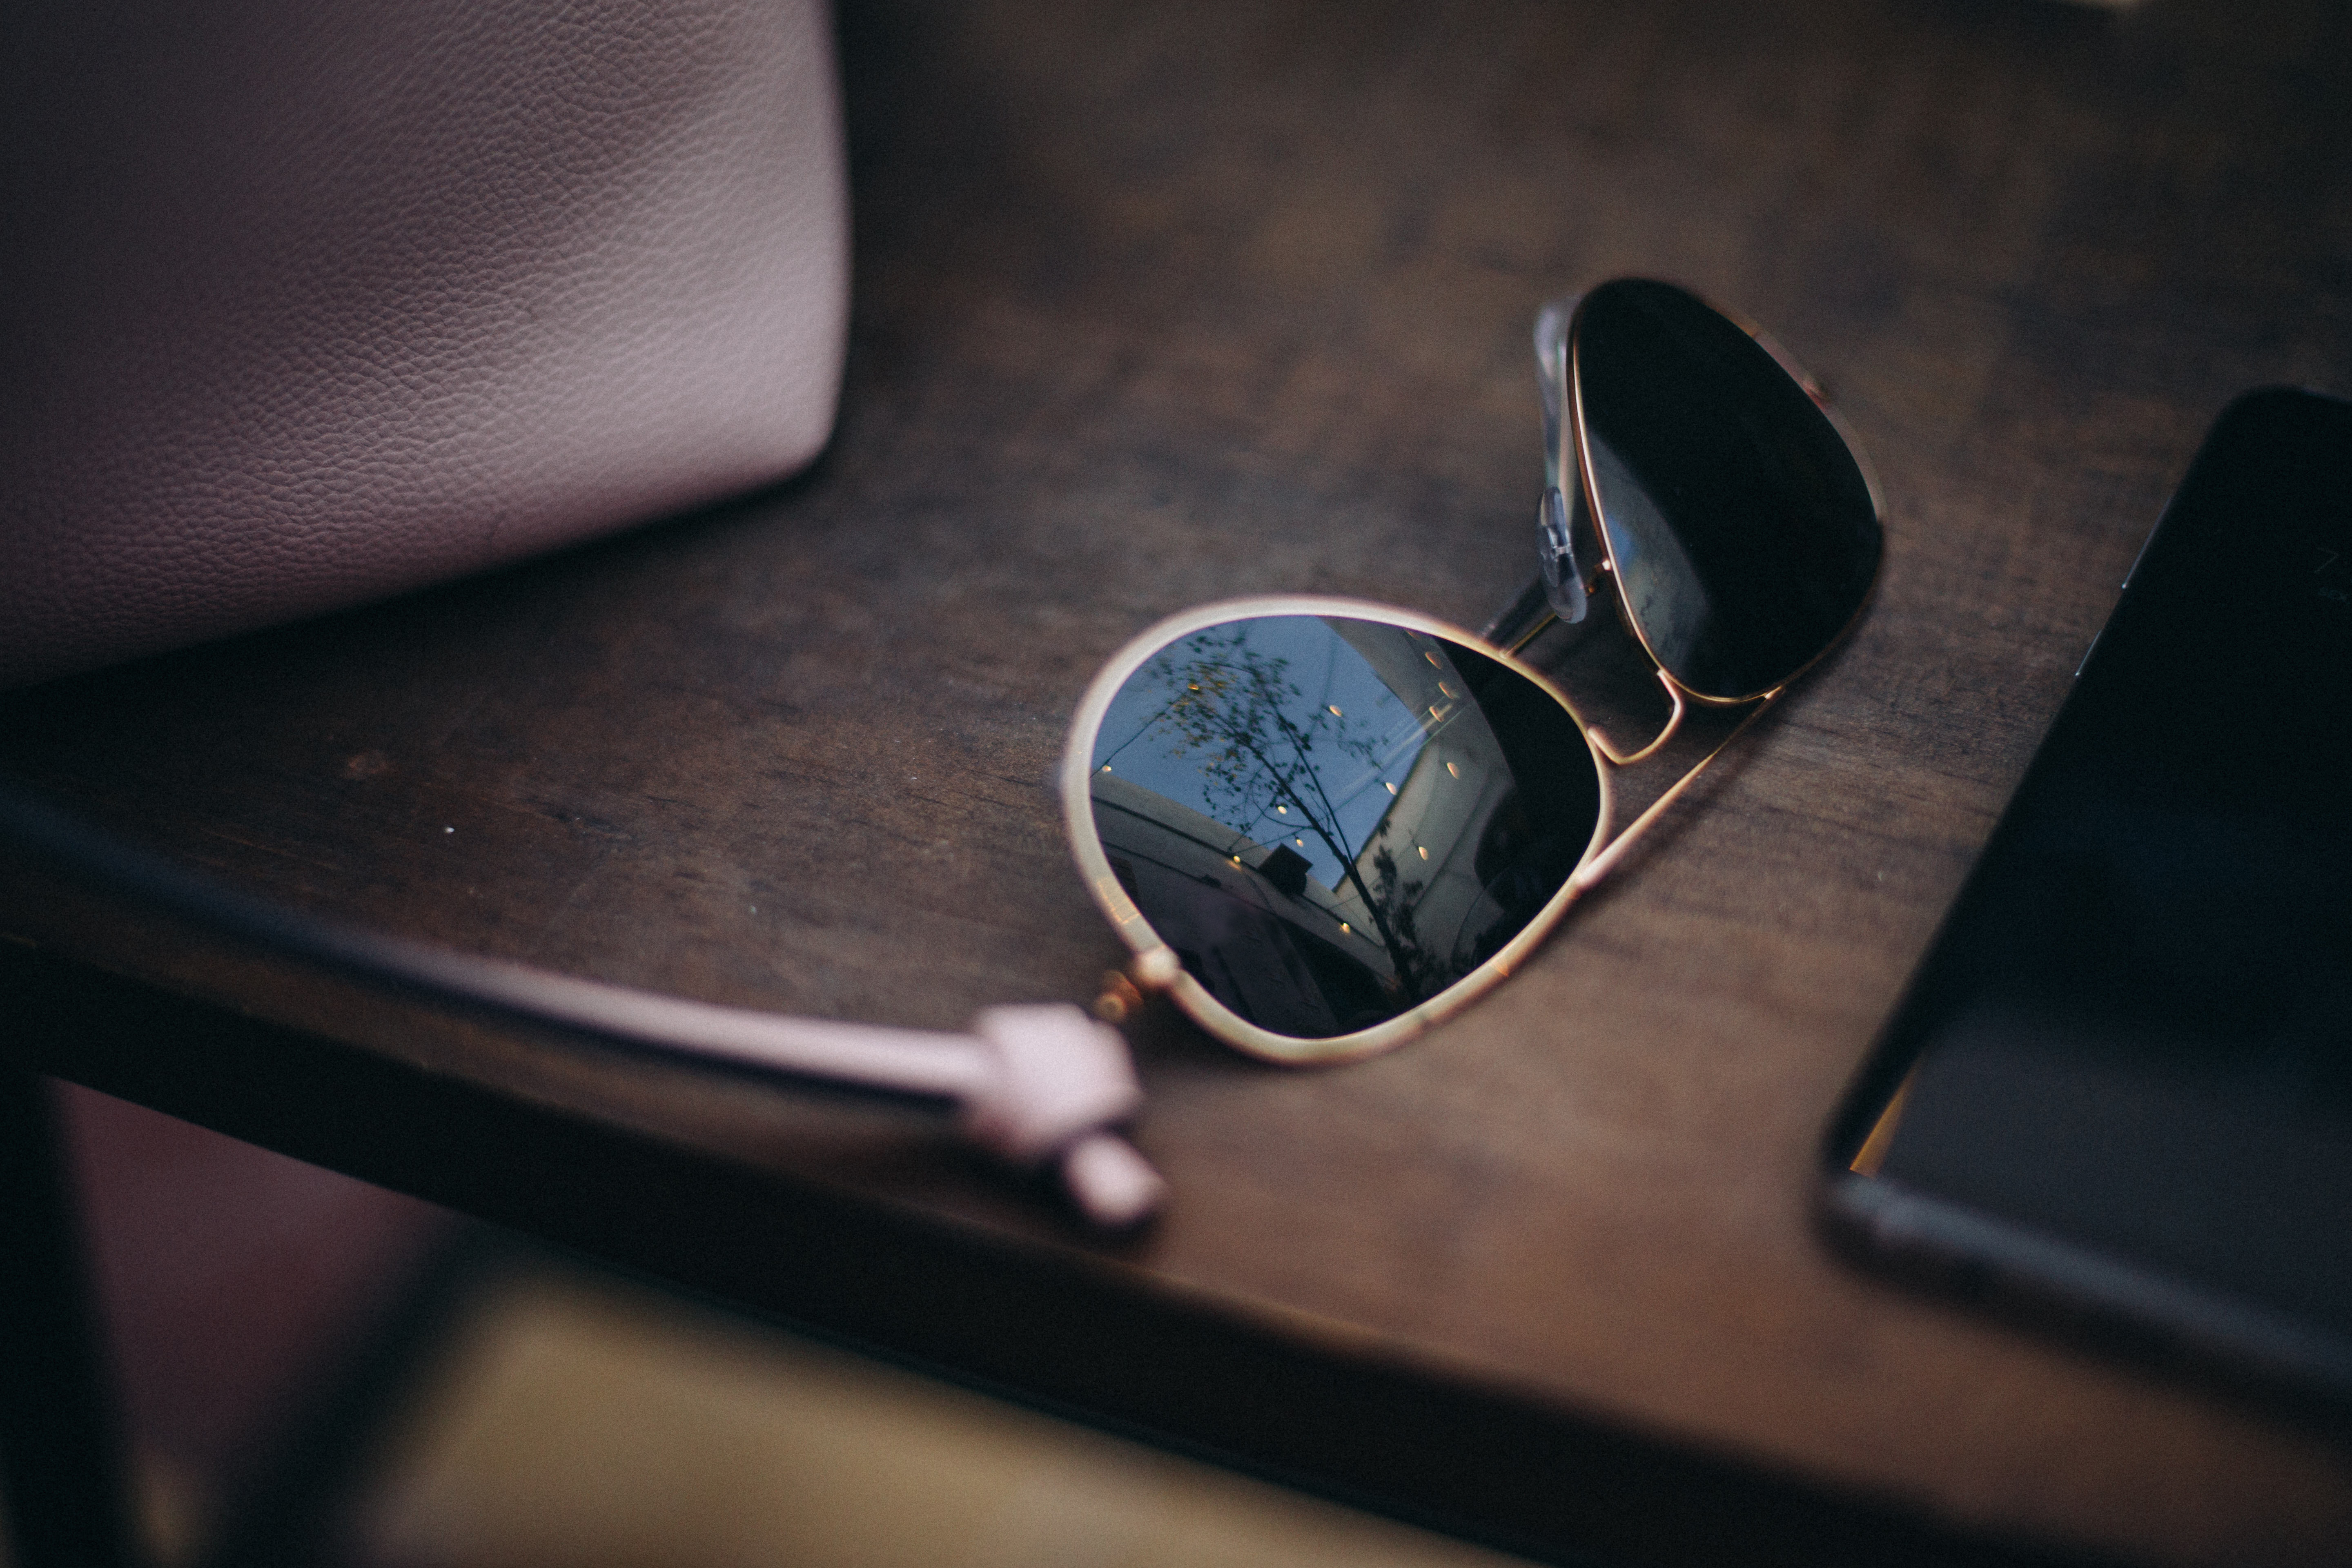 String lights reflected in sunglasses set on a wooden table | Source: Getty Images